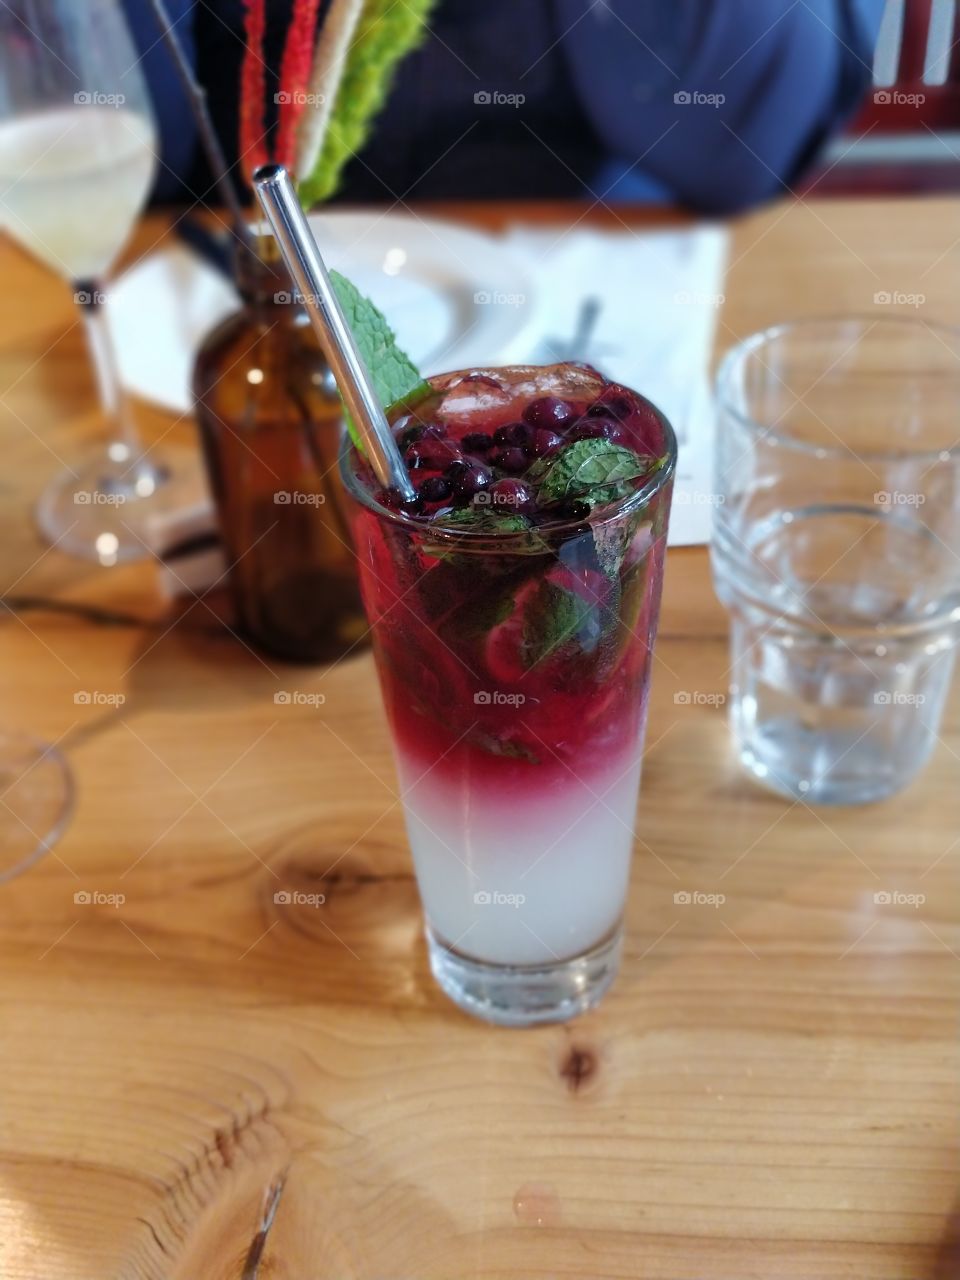 Nothing says summertime like a blueberry mojito!